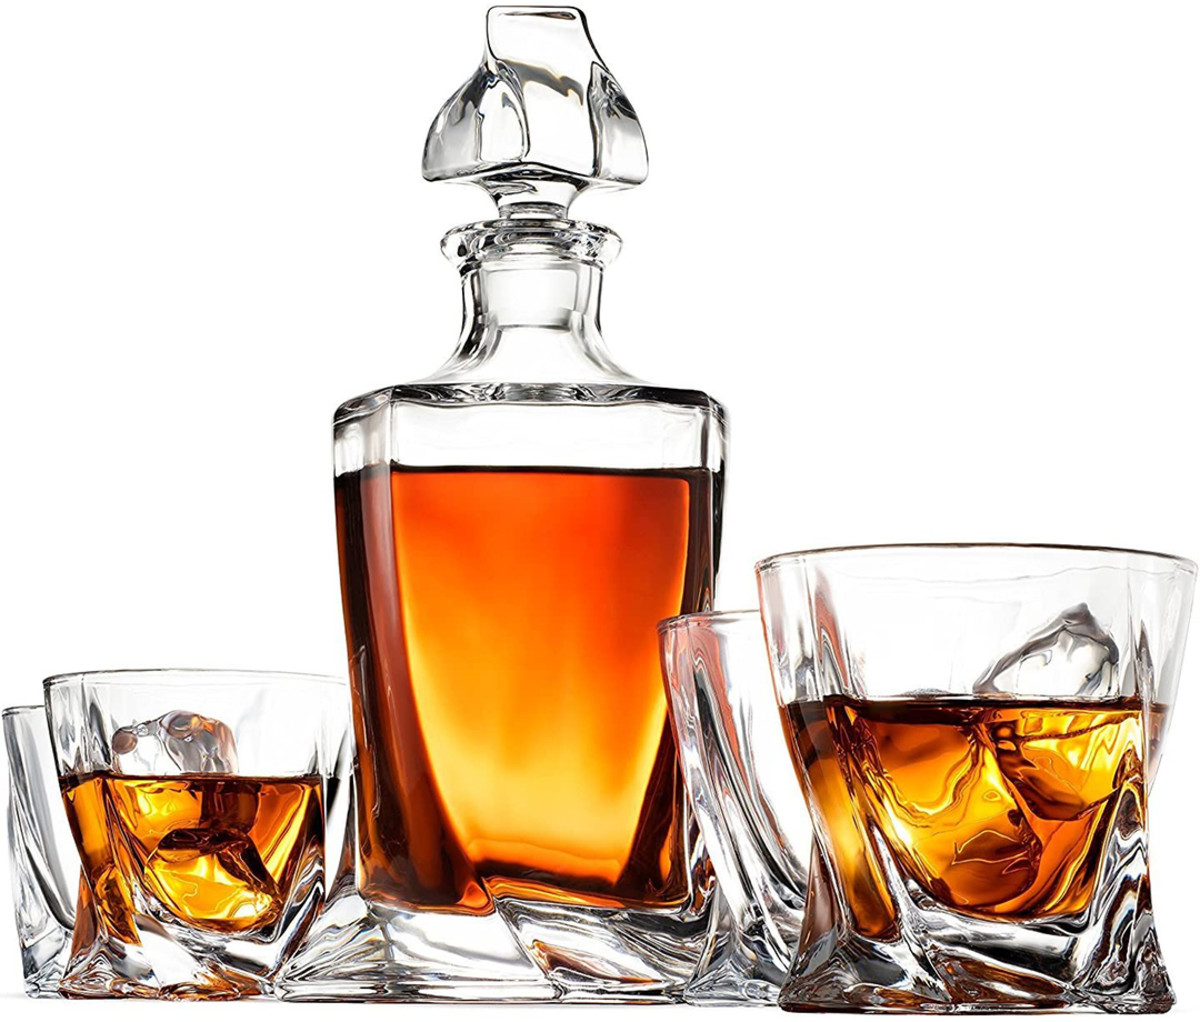 Gift Someone This Gorgeous Whiskey Decanter Set For Their Home Bar